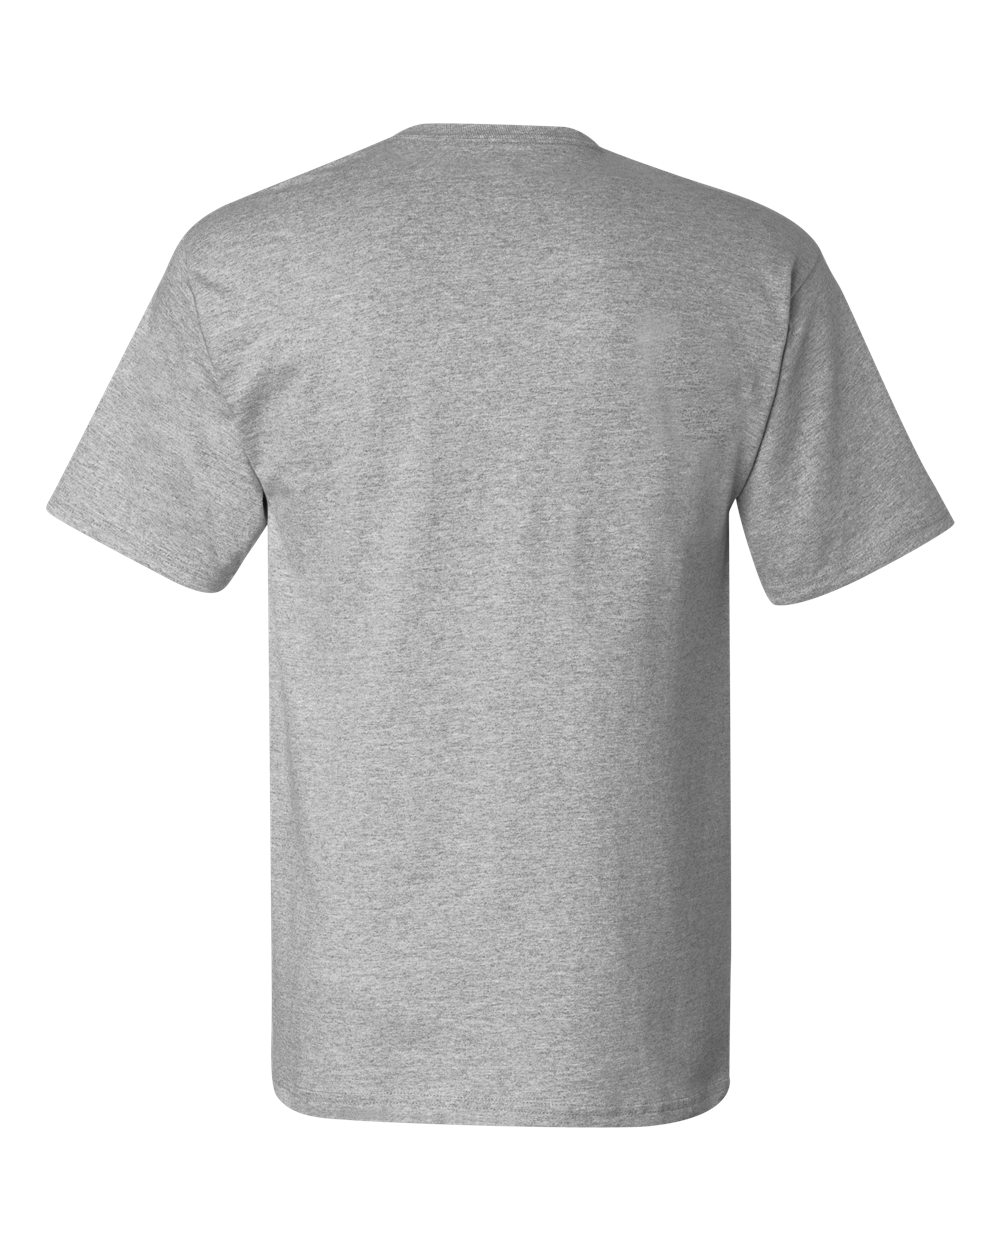 Hanes Mens Blank Short Sleeve Work T Shirt with a Pocket 5590 up to 3XL | eBay